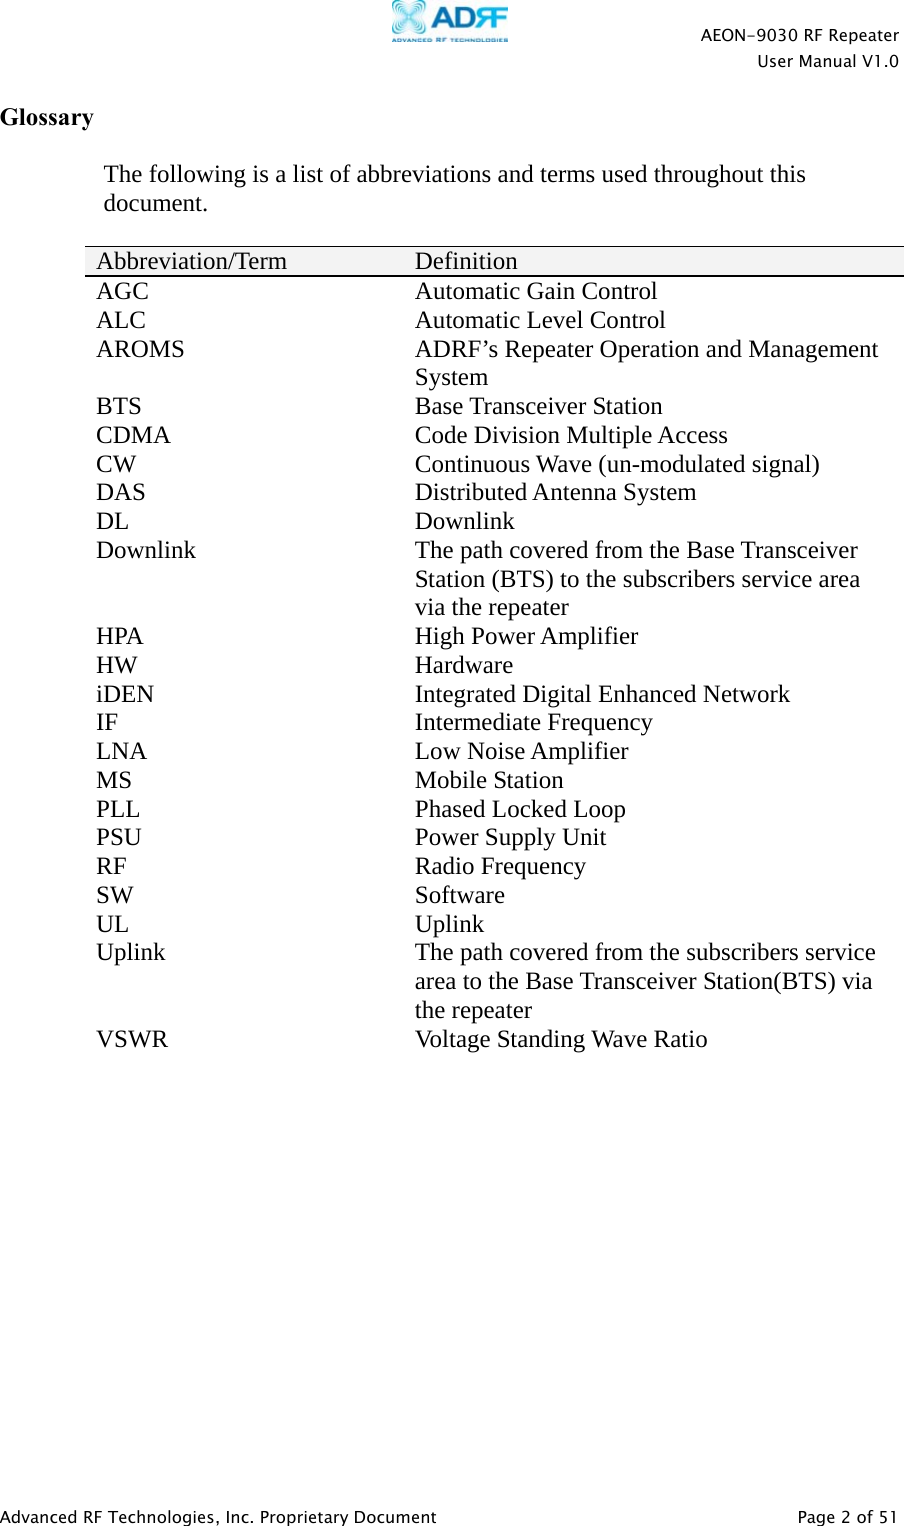    AEON-9030 RF Repeater  User Manual V1.0  Advanced RF Technologies, Inc. Proprietary Document   Page 2 of 51  Glossary The following is a list of abbreviations and terms used throughout this document.  Abbreviation/Term  Definition AGC Automatic Gain Control ALC  Automatic Level Control AROMS  ADRF’s Repeater Operation and Management System BTS Base Transceiver Station CDMA  Code Division Multiple Access CW Continuous Wave (un-modulated signal) DAS Distributed Antenna System DL Downlink Downlink  The path covered from the Base Transceiver Station (BTS) to the subscribers service area via the repeater HPA High Power Amplifier HW Hardware iDEN  Integrated Digital Enhanced Network IF Intermediate Frequency LNA Low Noise Amplifier MS  Mobile Station  PLL  Phased Locked Loop PSU  Power Supply Unit RF Radio Frequency SW Software UL Uplink Uplink  The path covered from the subscribers service area to the Base Transceiver Station(BTS) via the repeater  VSWR  Voltage Standing Wave Ratio  